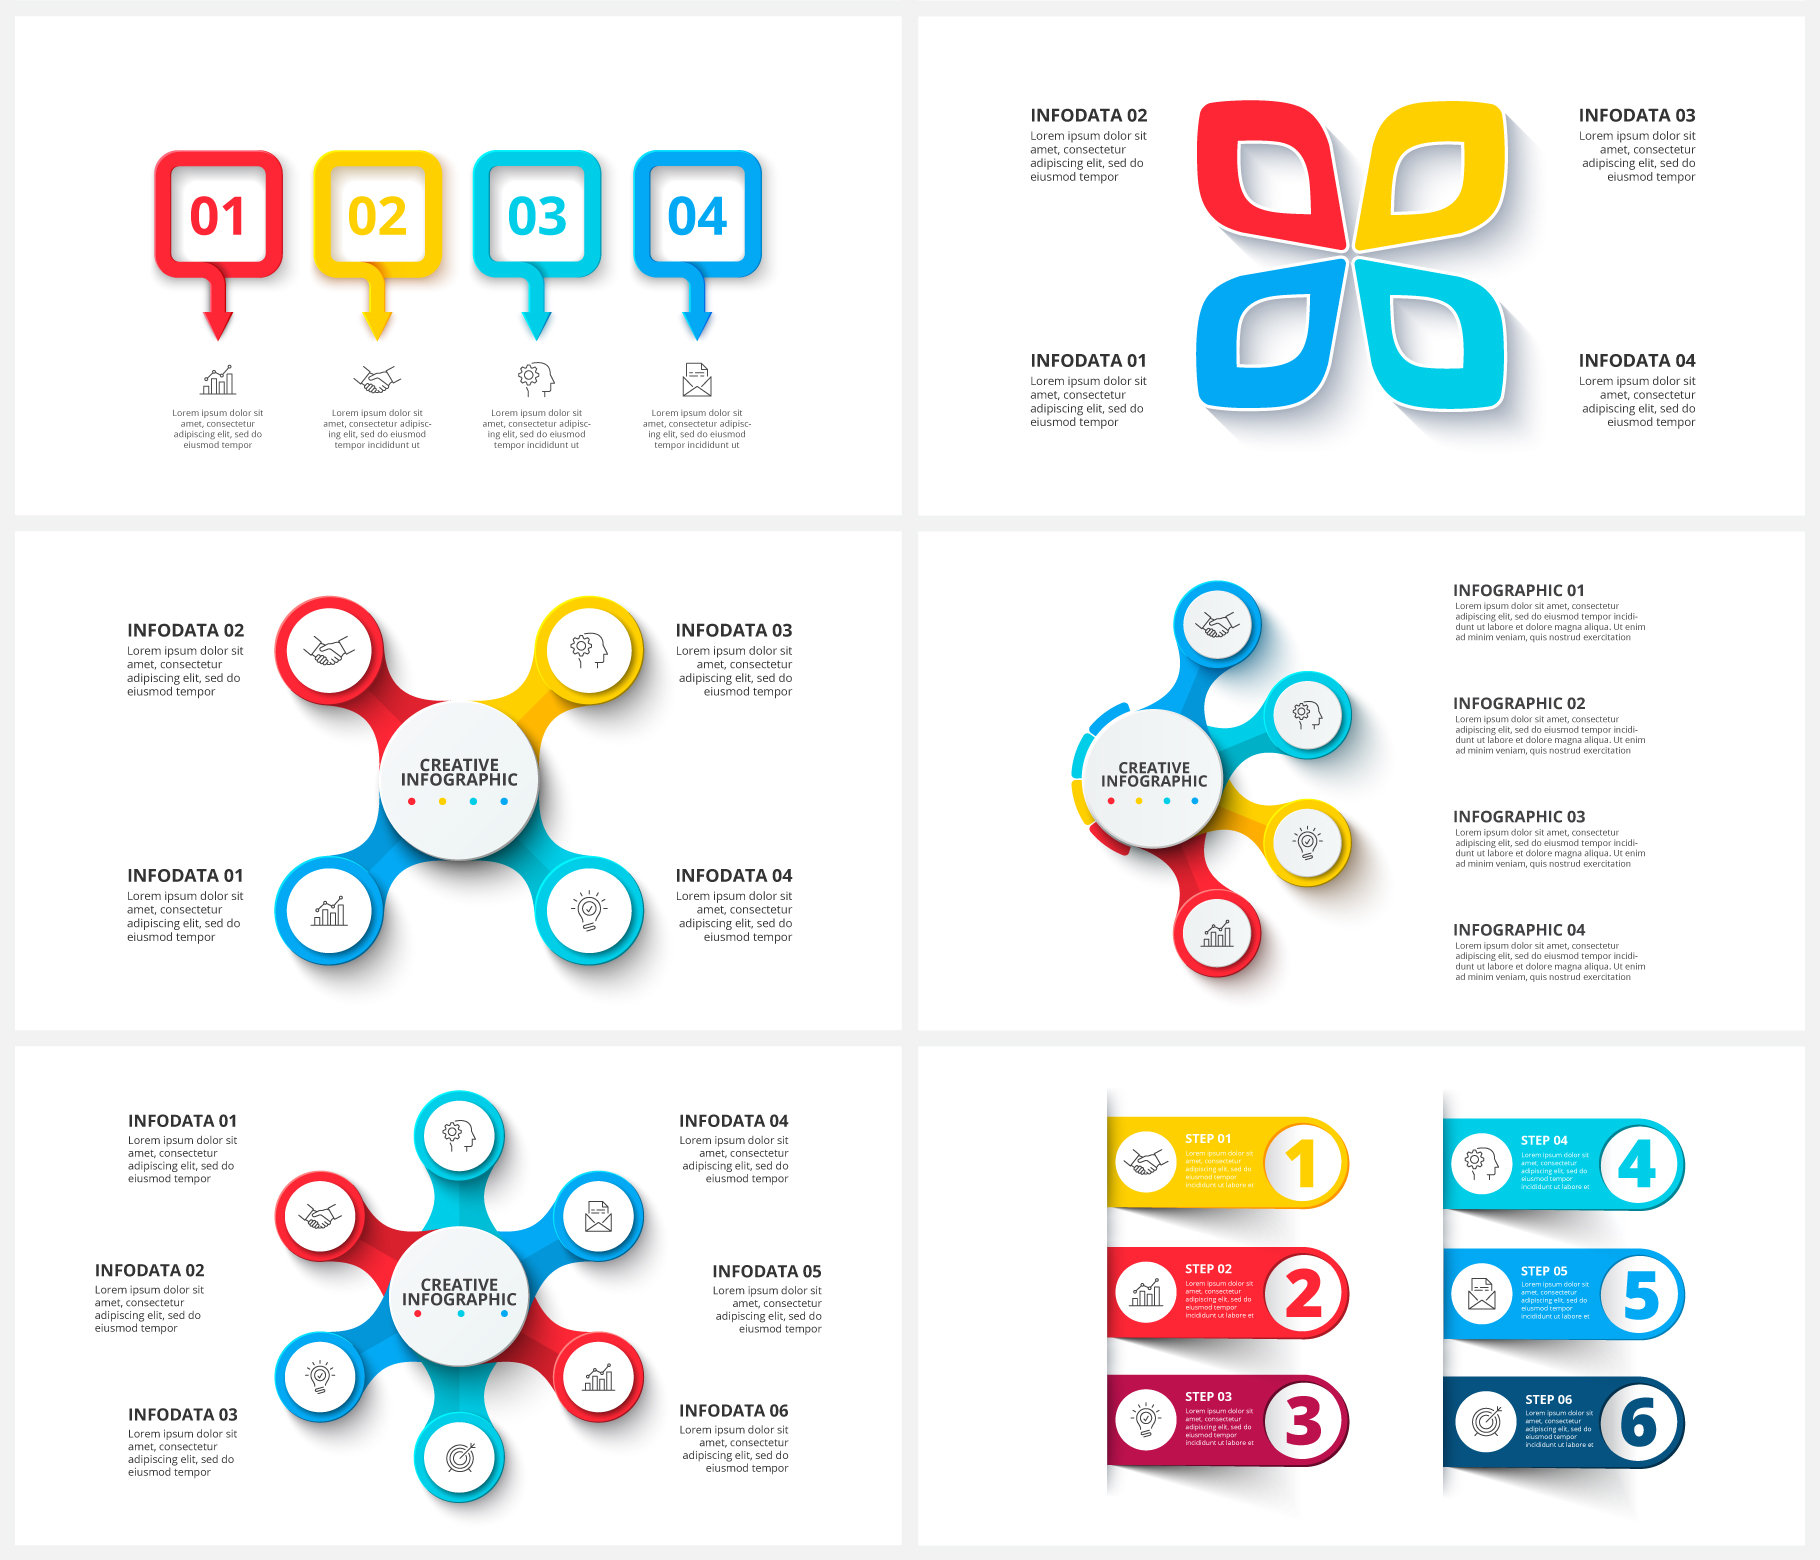 microsoft powerpoint infographic templates free